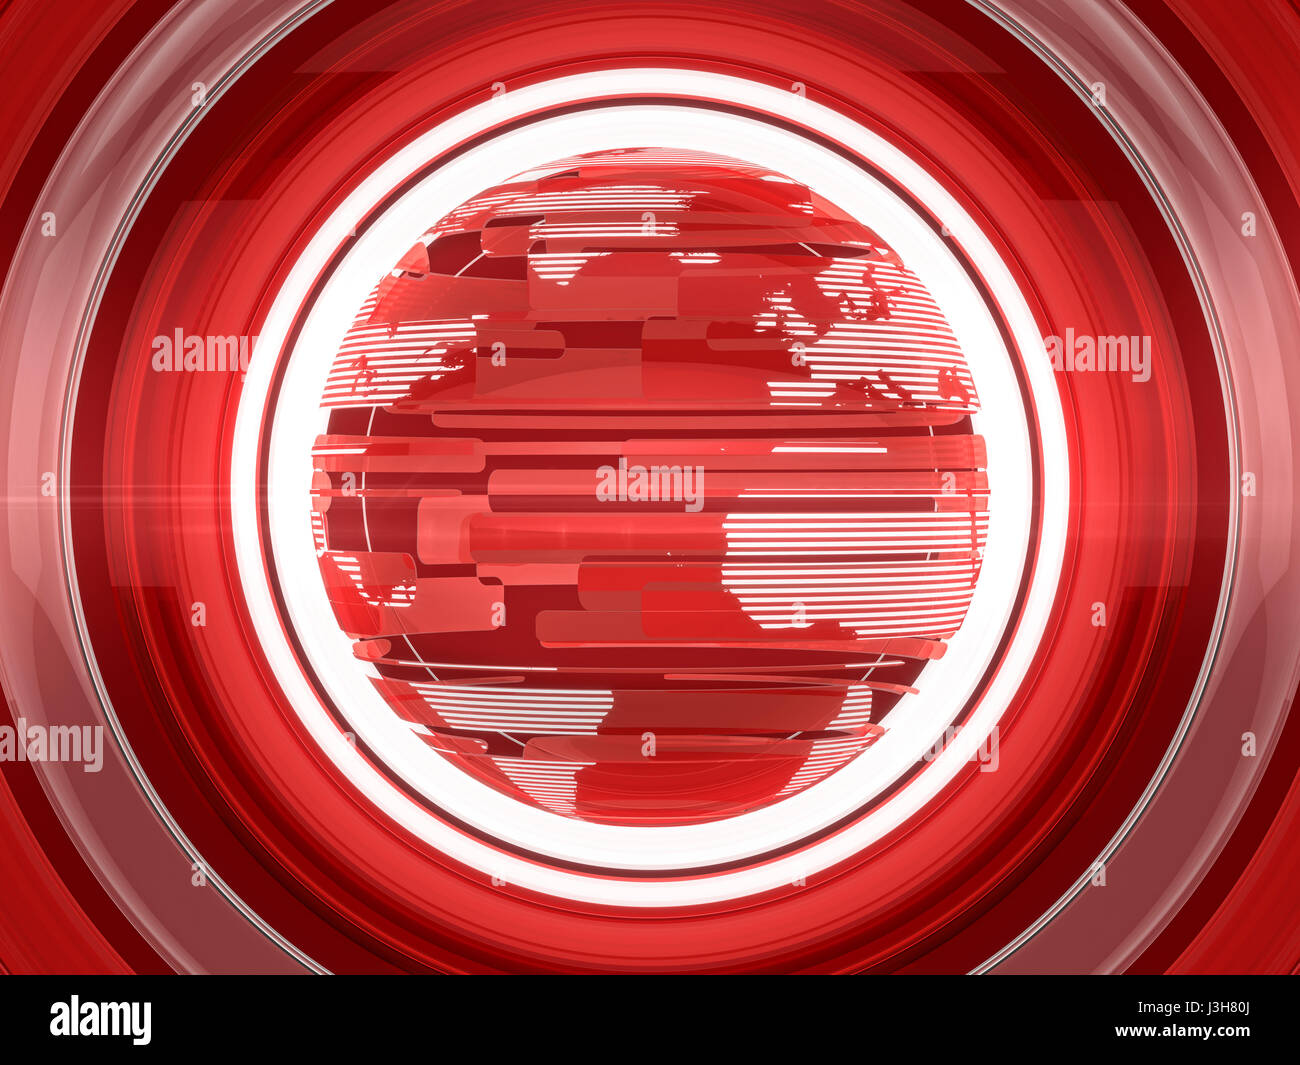 Red Glossy Globe and World Map with White Stripe Pattern Stock Photo